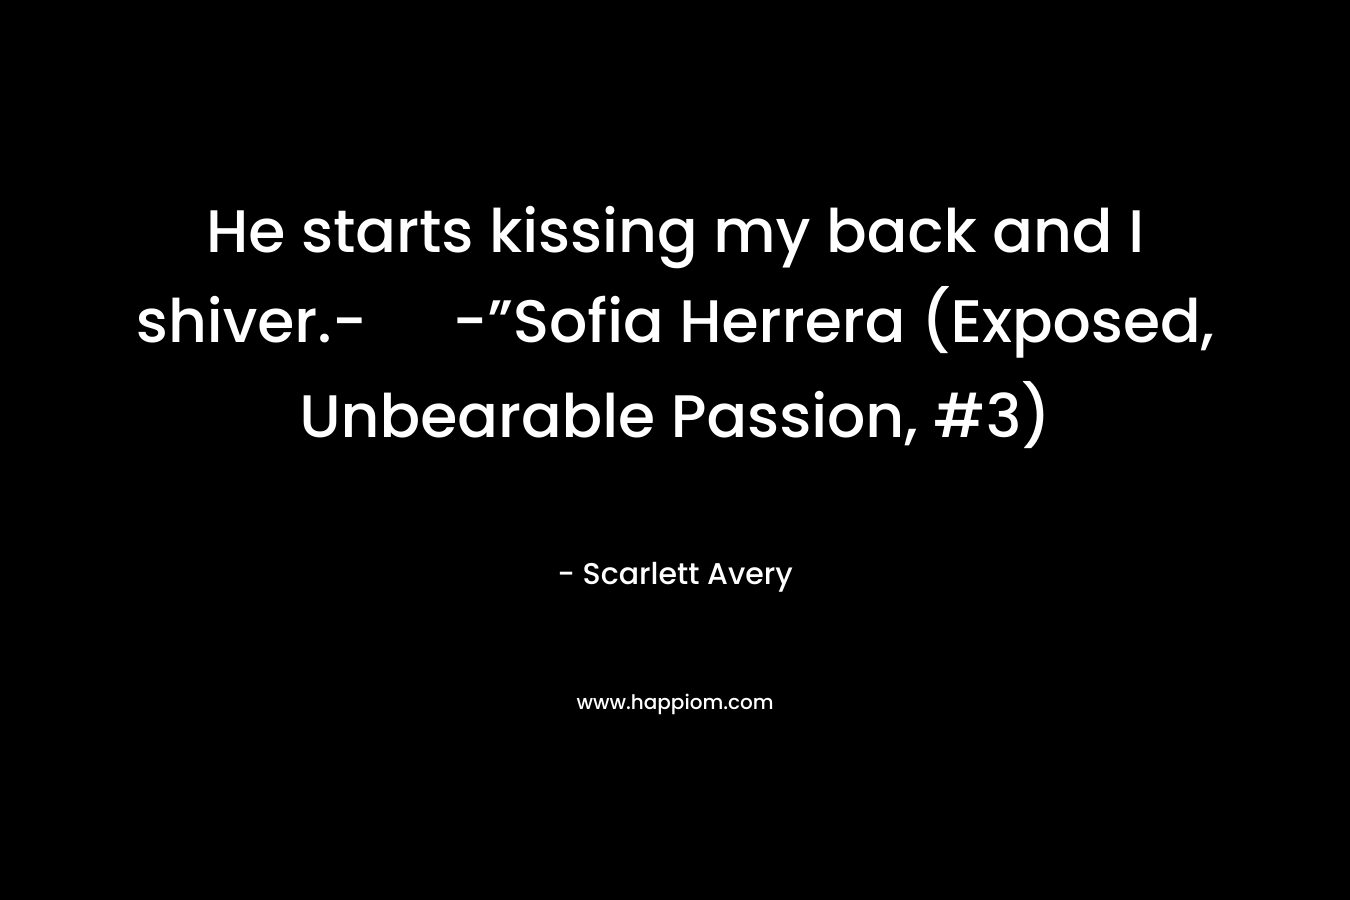 He starts kissing my back and I shiver.- -”Sofia Herrera (Exposed, Unbearable Passion, #3) – Scarlett Avery